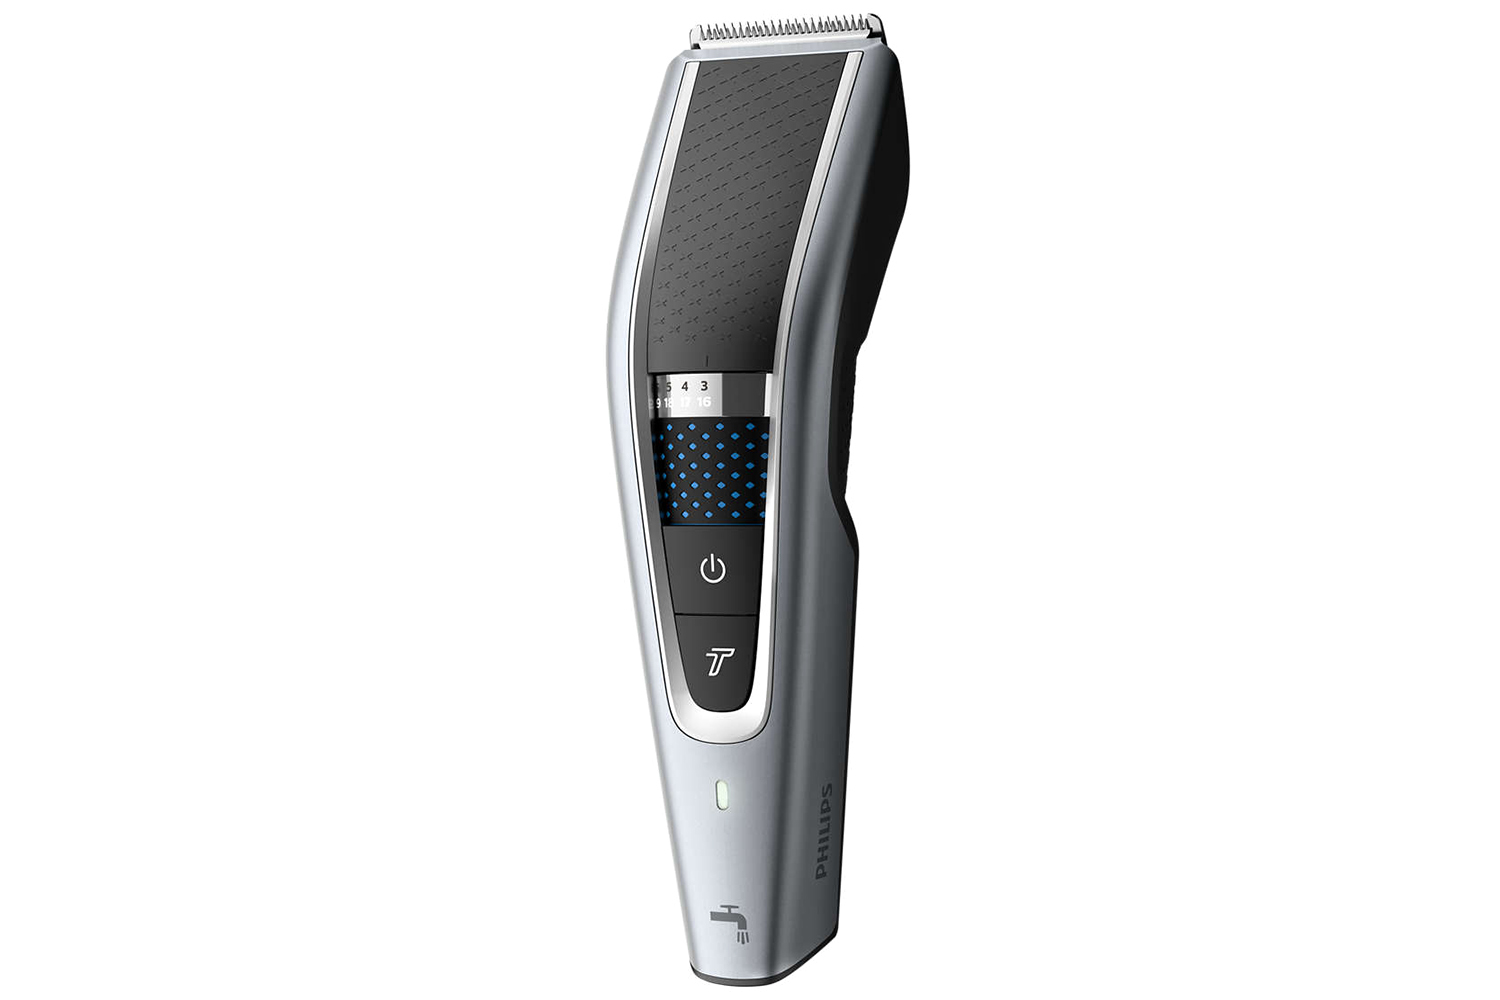 philips series 5000 hair trimmer